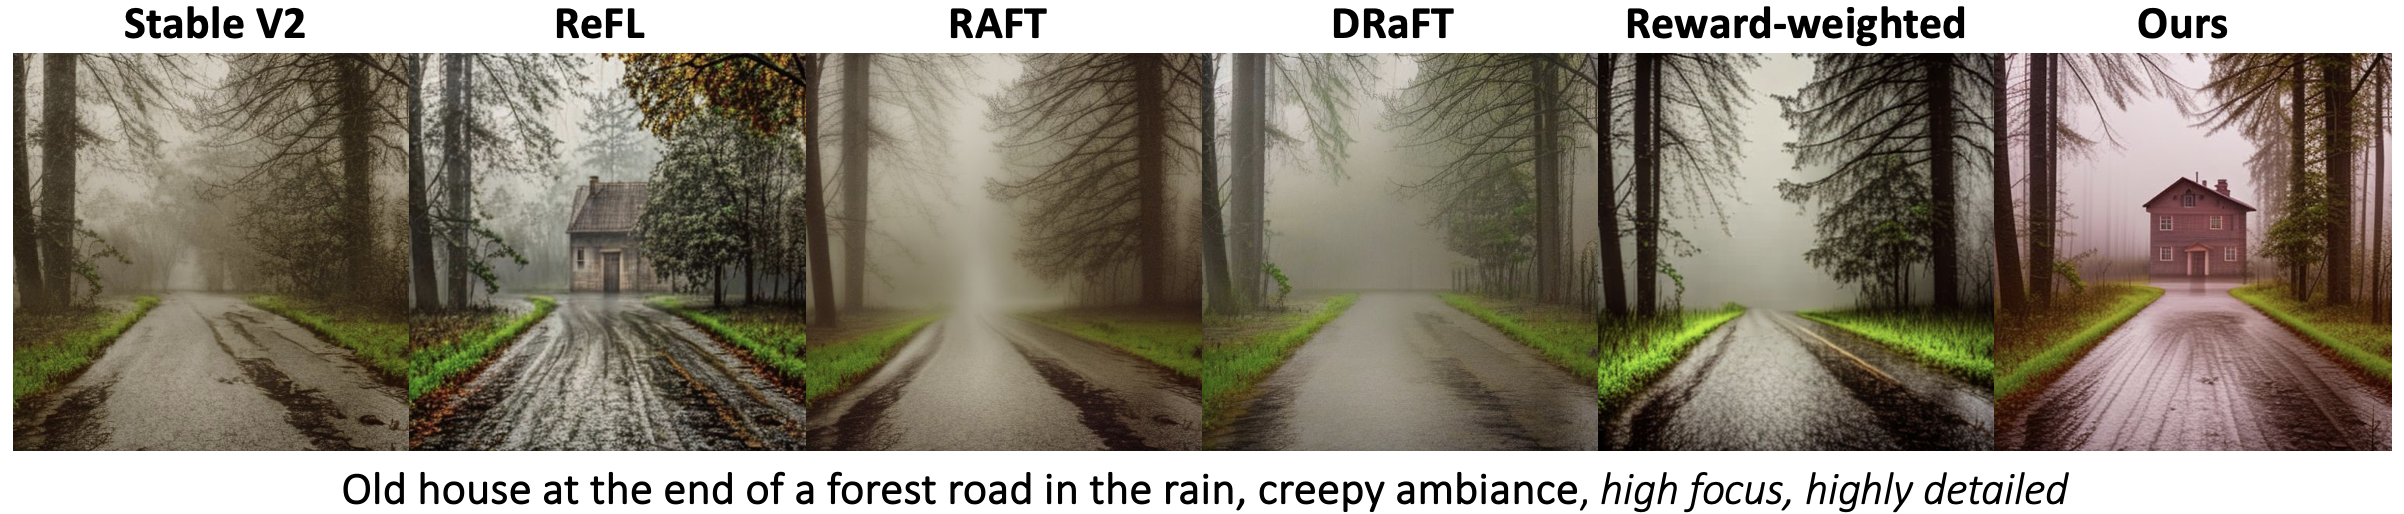 Old house at the end of a forest road in the rain, creepy ambiance, high focus, highly detailed